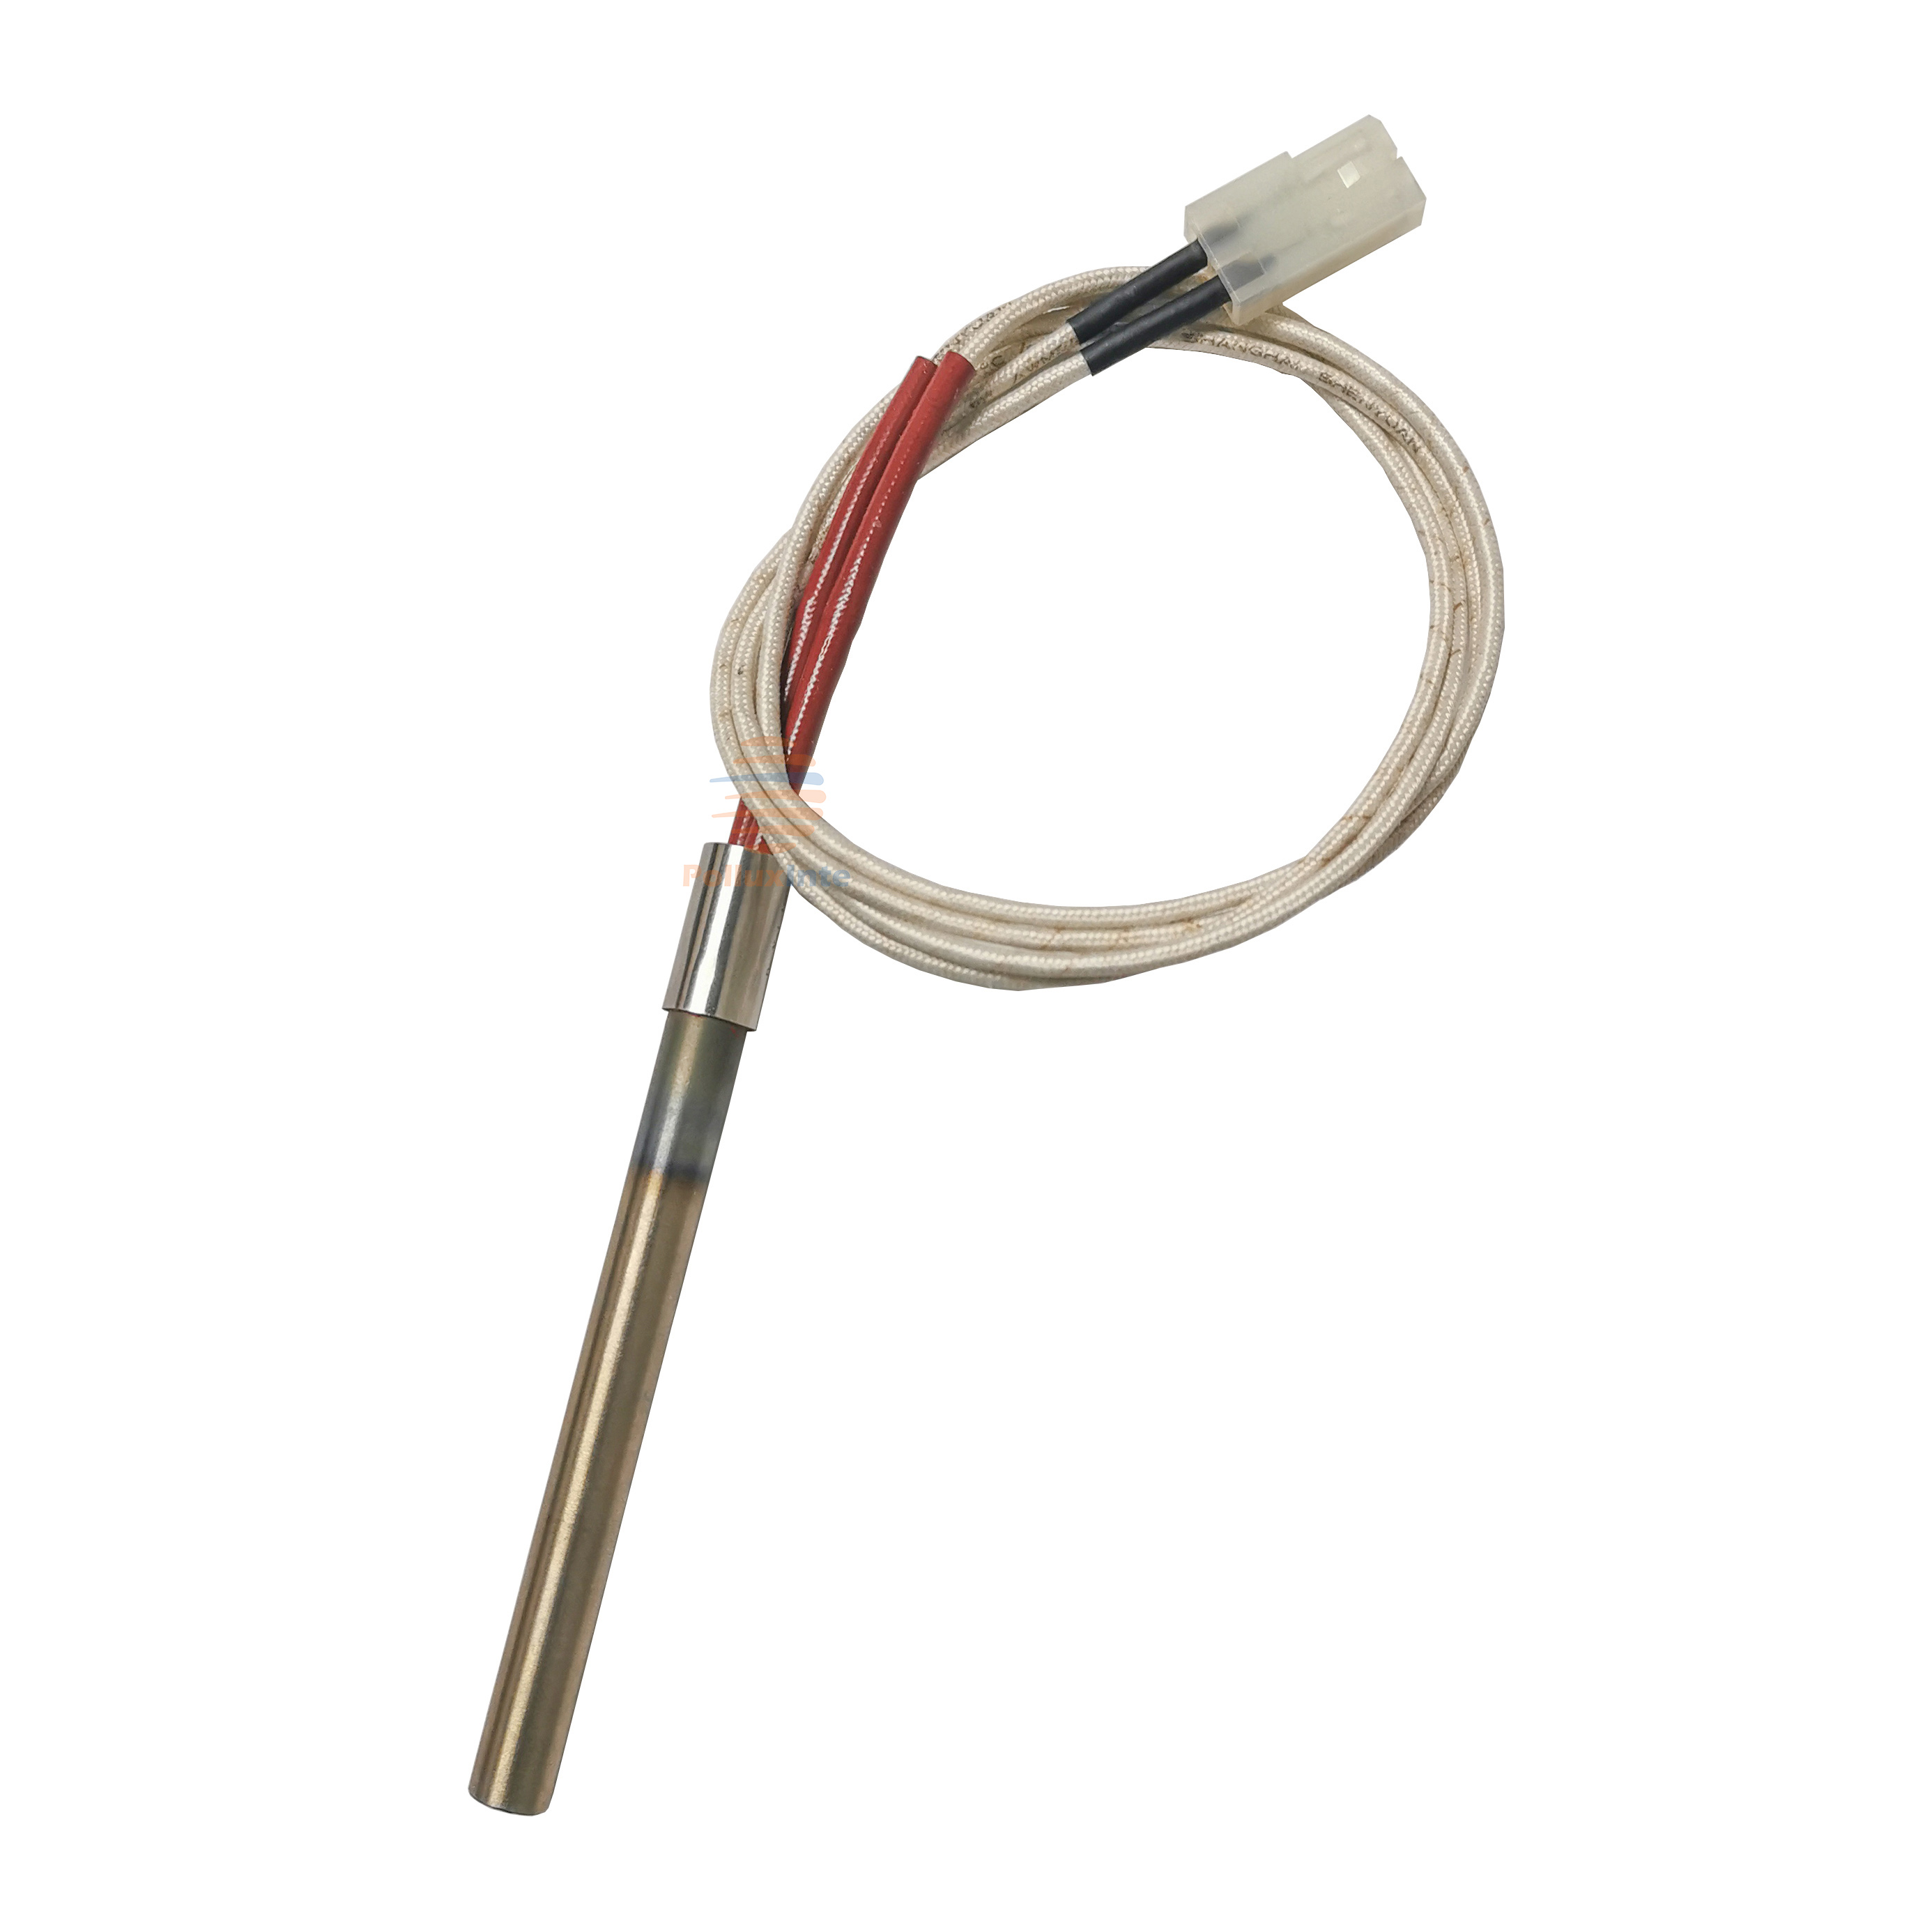 Replacement HOT ROD IGNITER For Various Pellet Smoker Models 